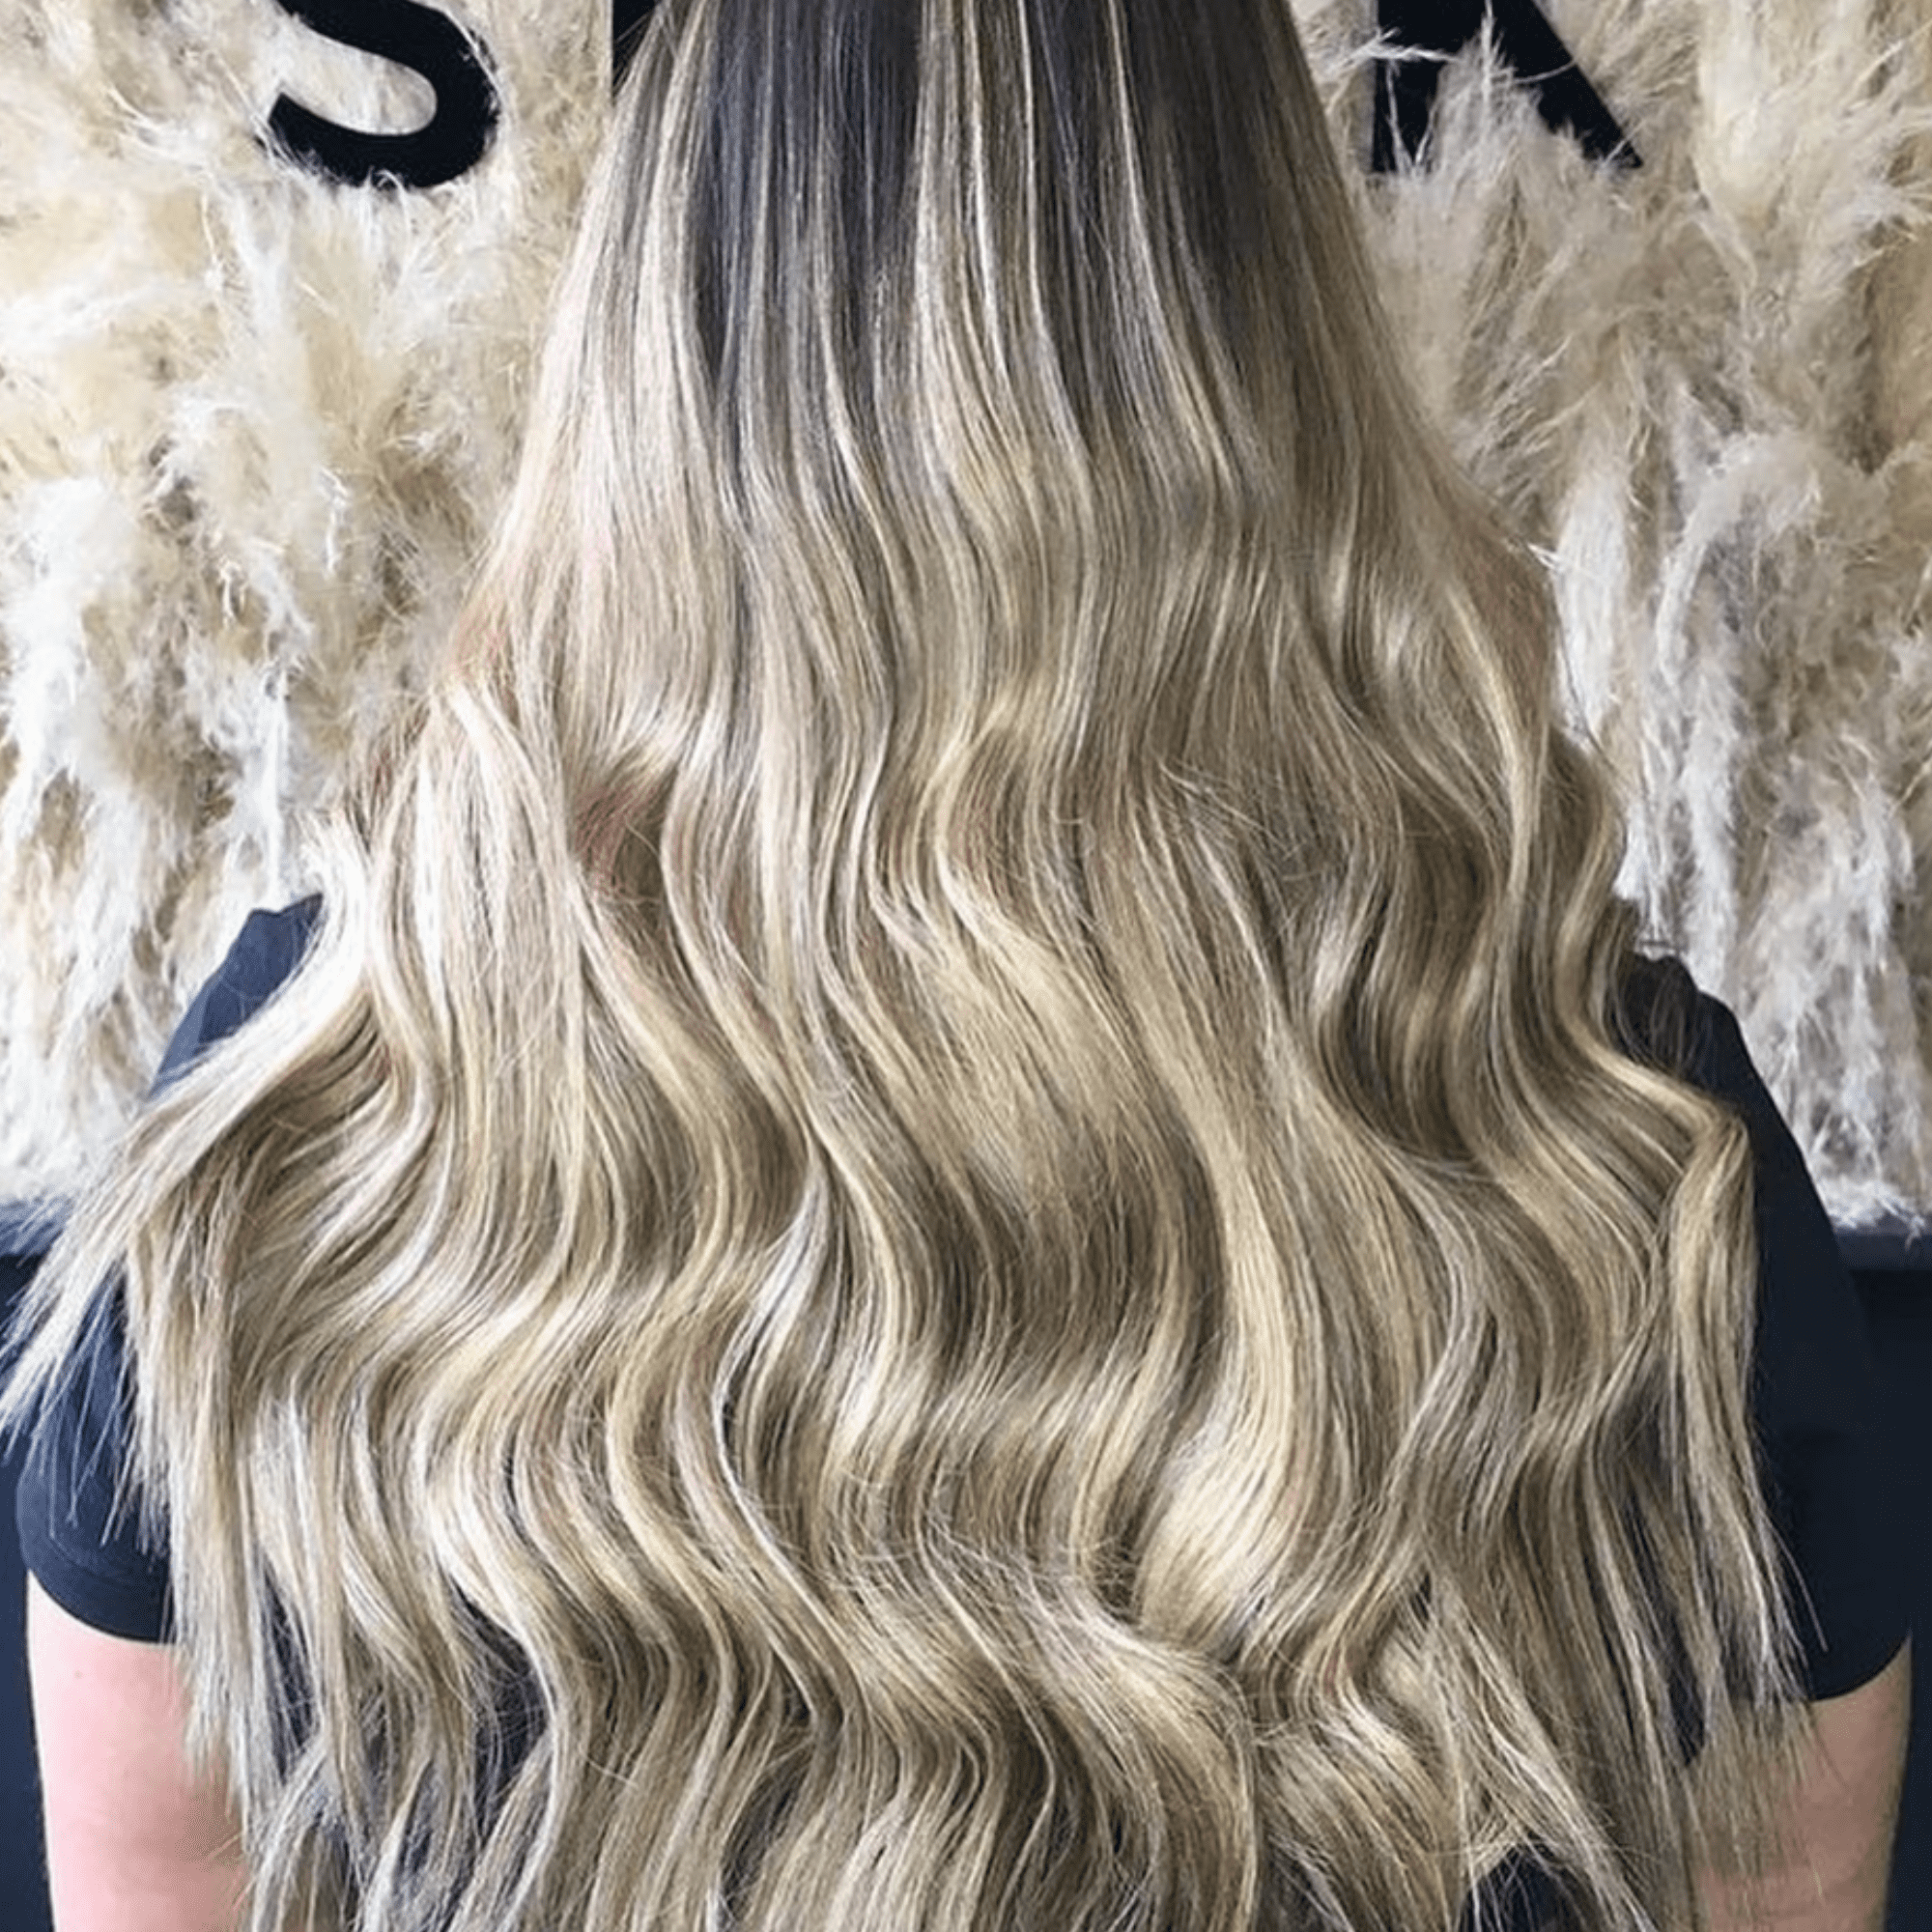 14" Invisible Tape Extensions Rooted Supermodel